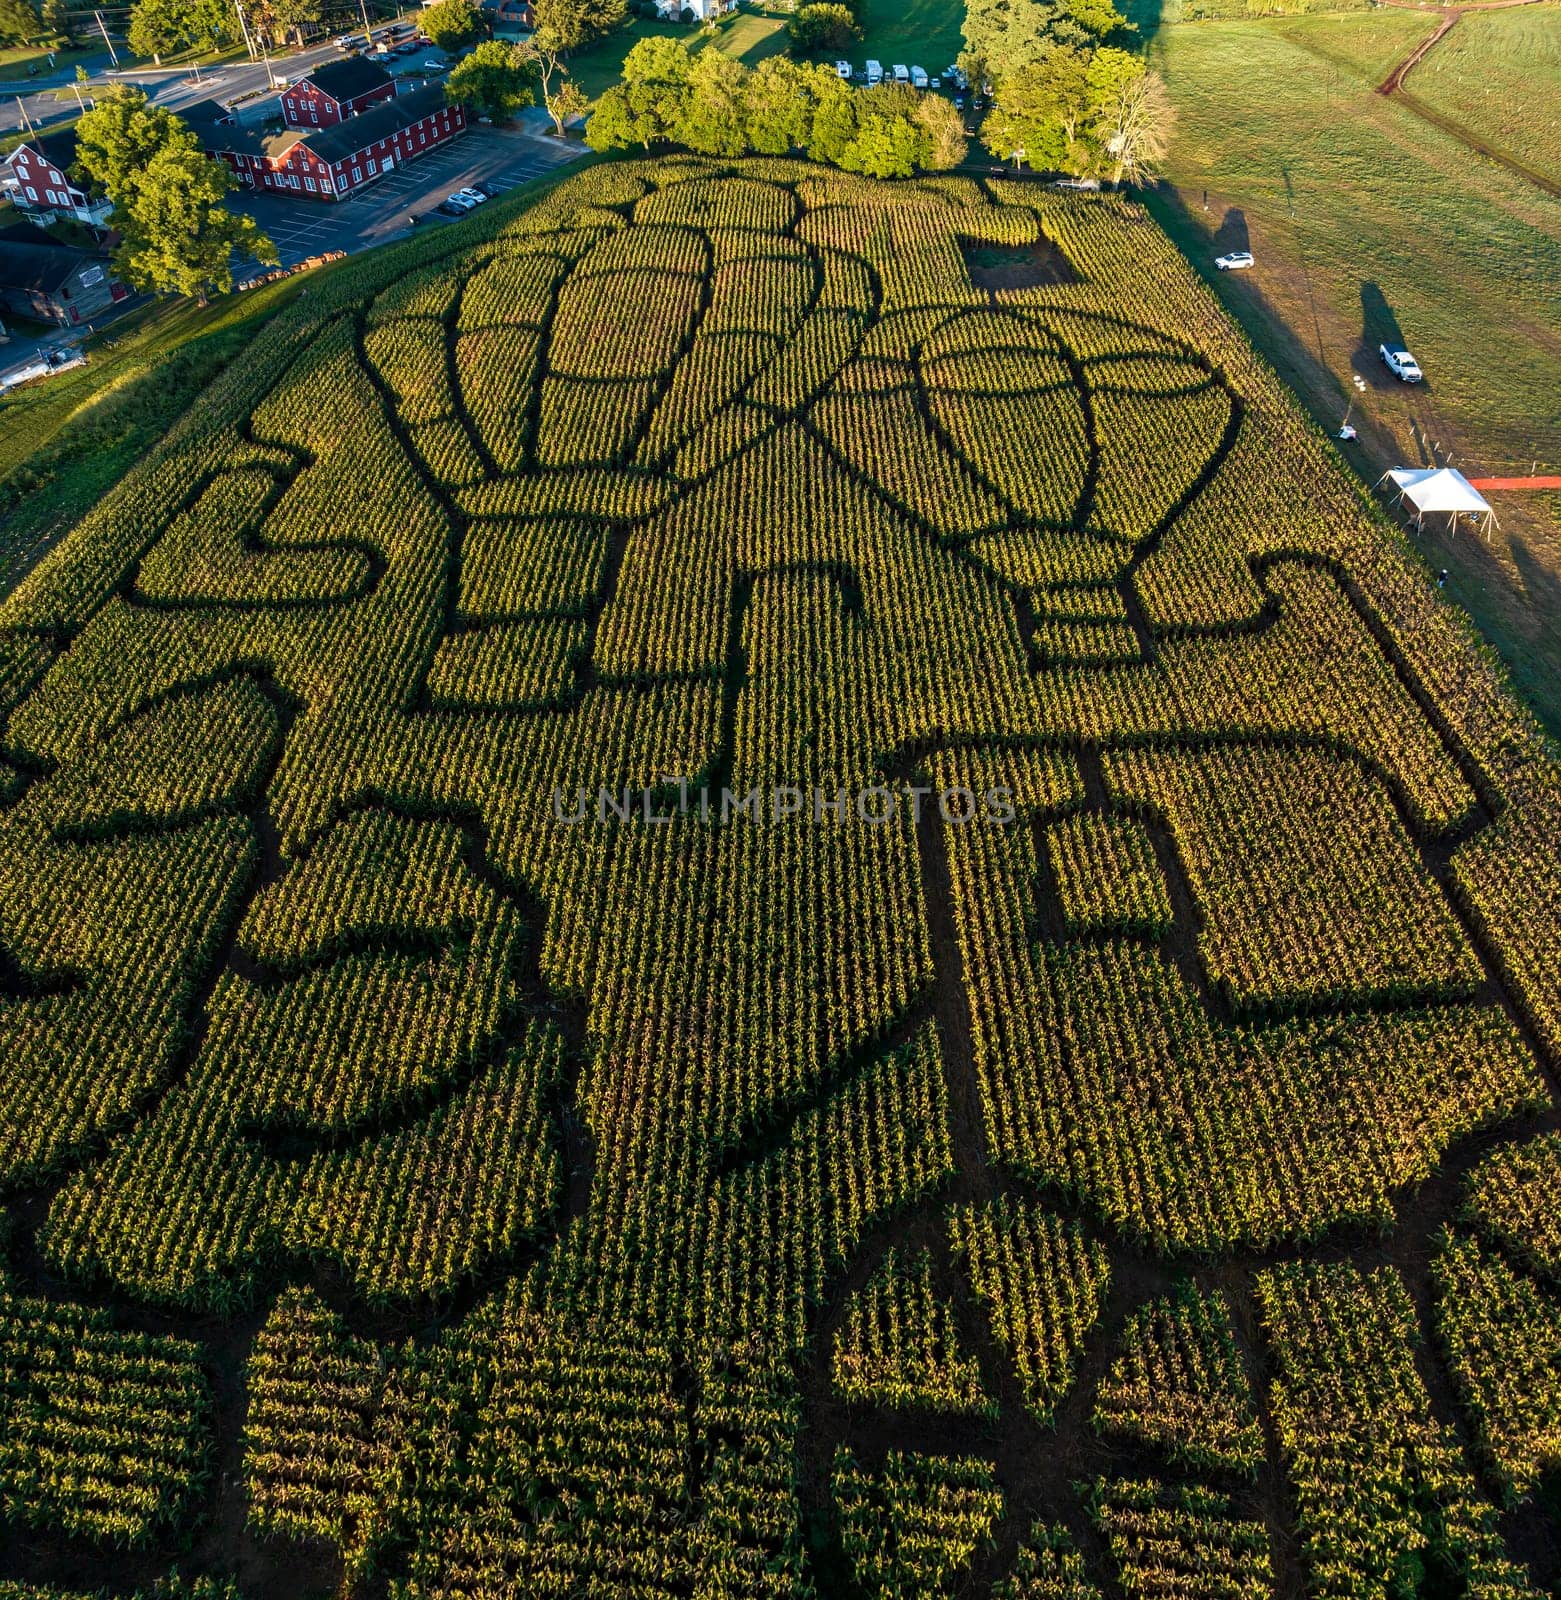 Beautiful Aerial View of Agricultural Pattern, Craved into a Core Field, Making a Maze, no people are present.